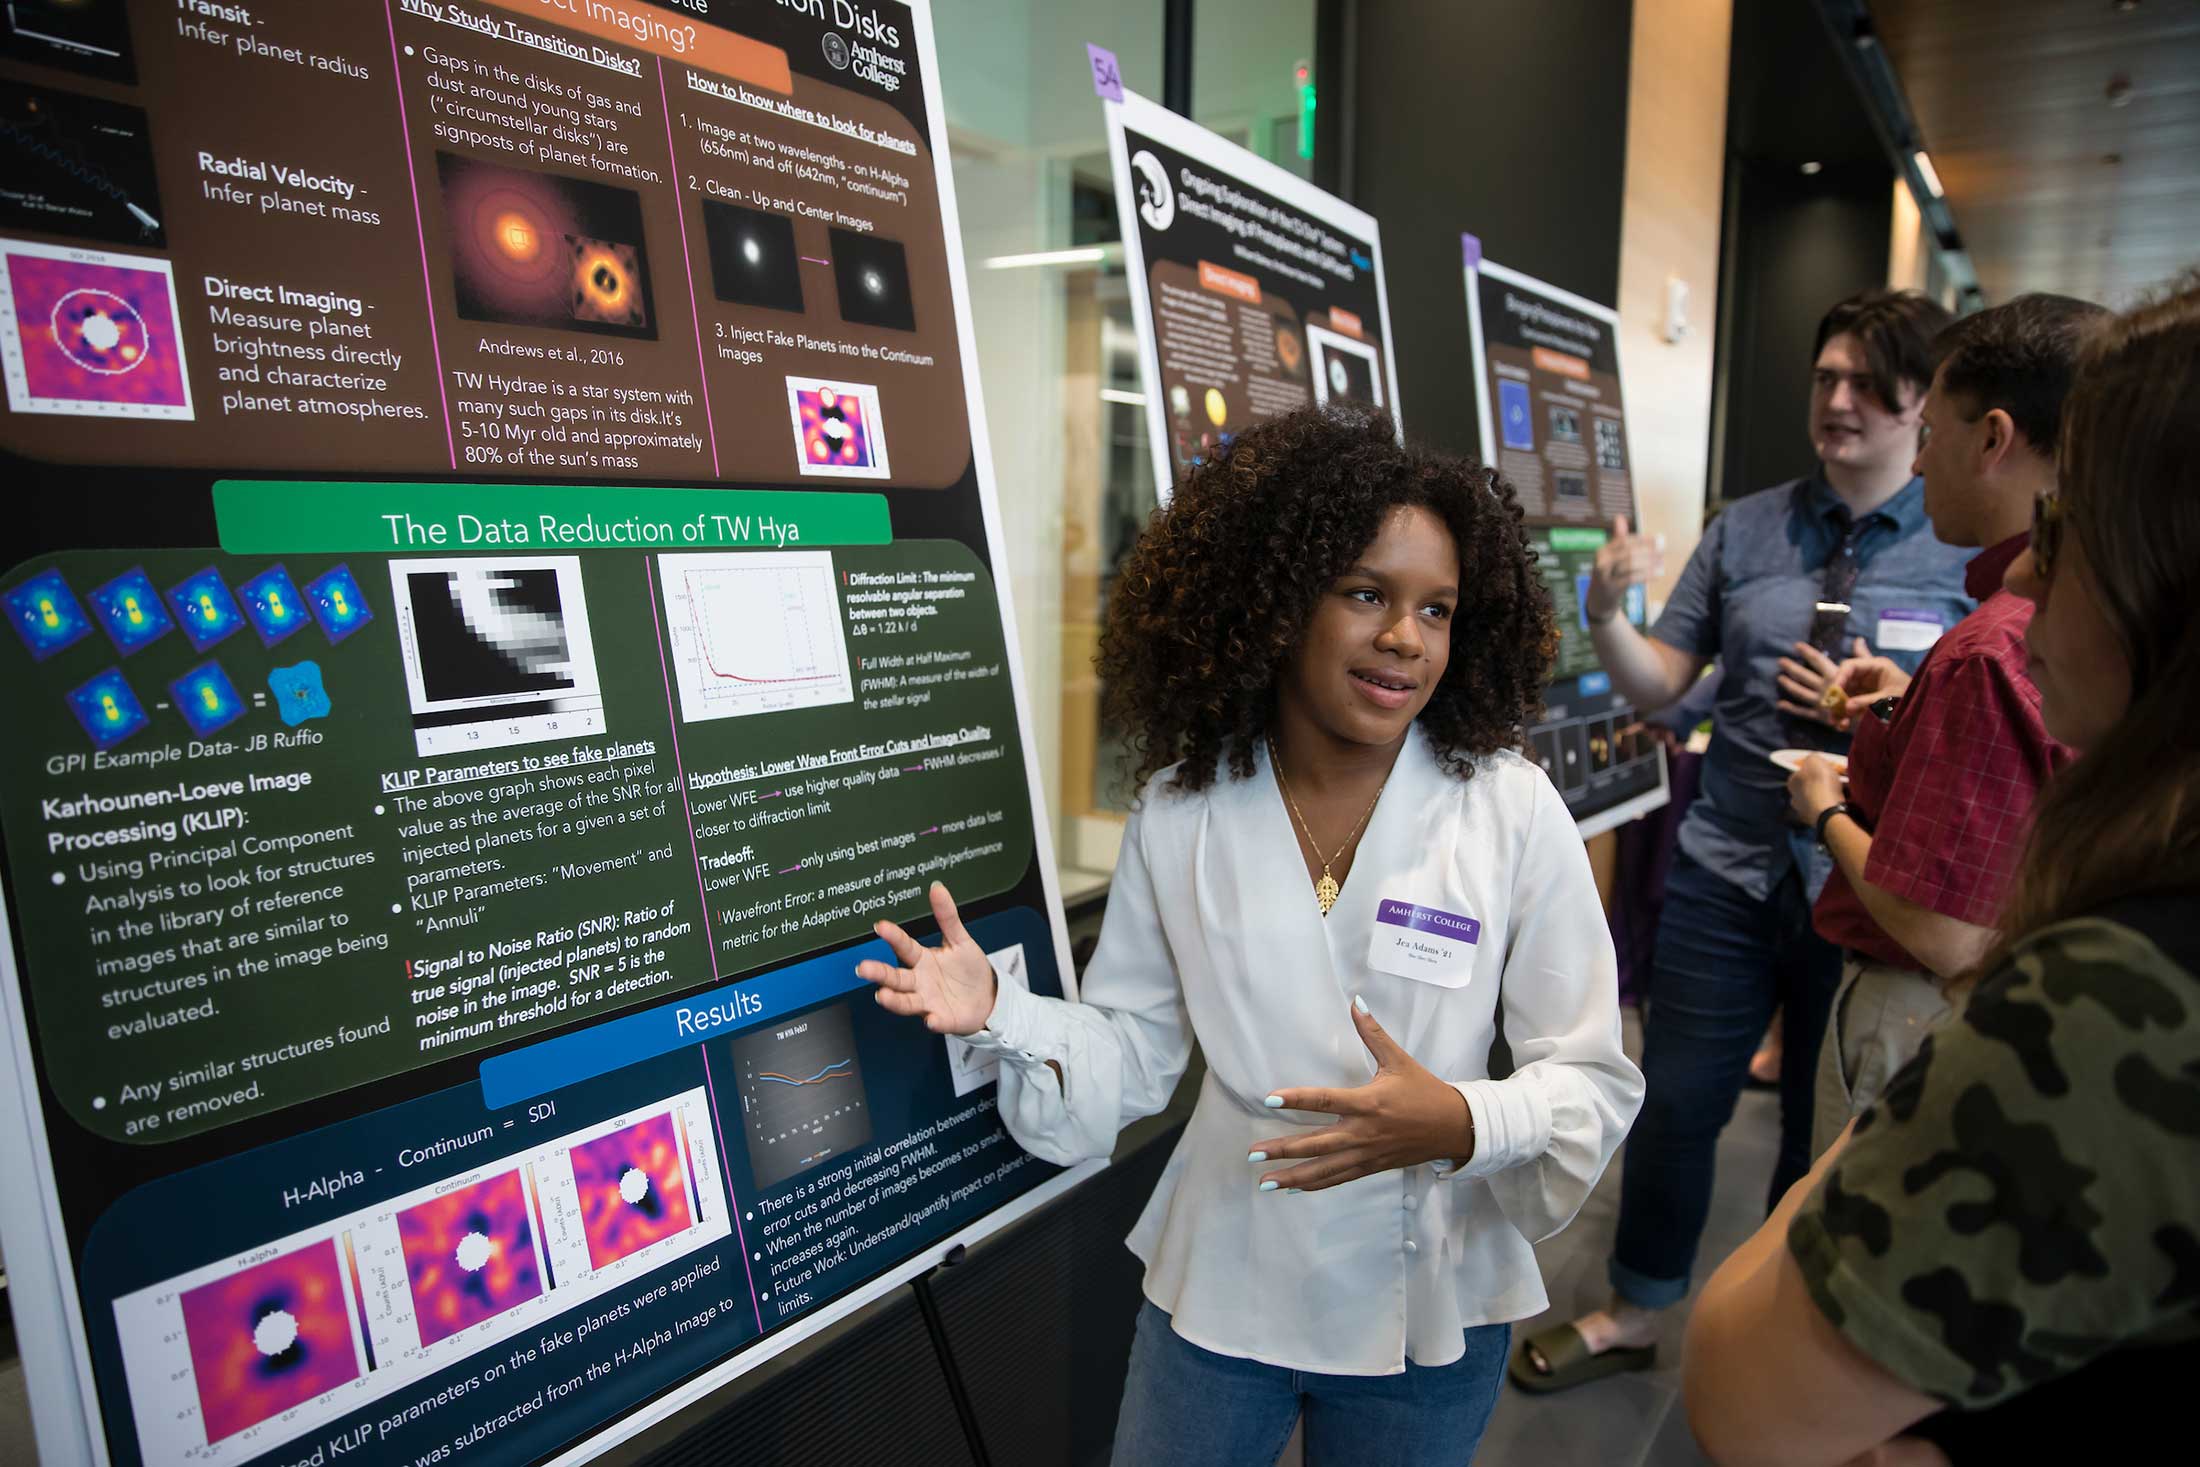 A student describes her summer research which is illustrated on a large poster